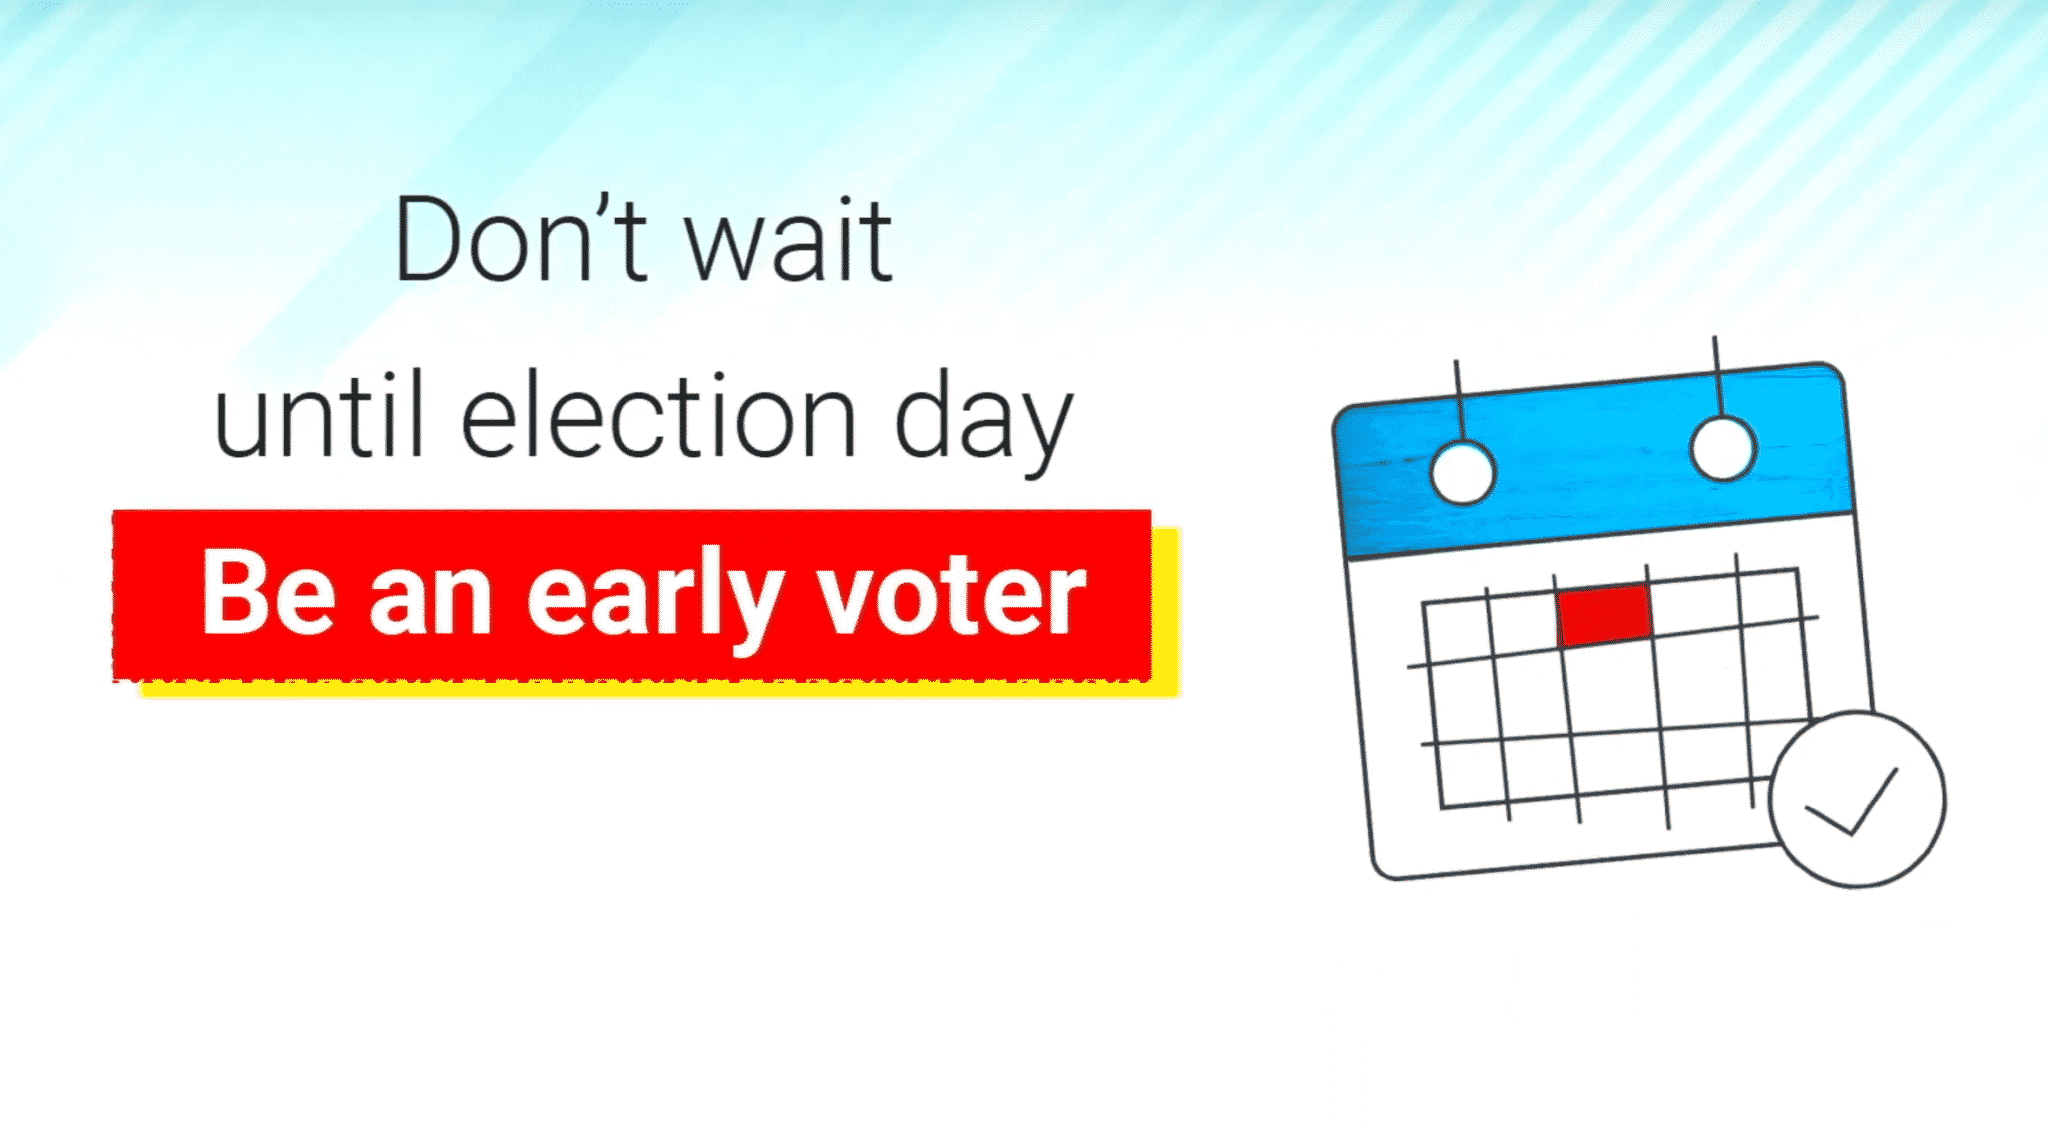 [CREDIT: RI Secretary of State] RI Early Voting has begun and runs through Nov. 2, 2020. You need an ID, and a visit to your local city or town hall during business hours.